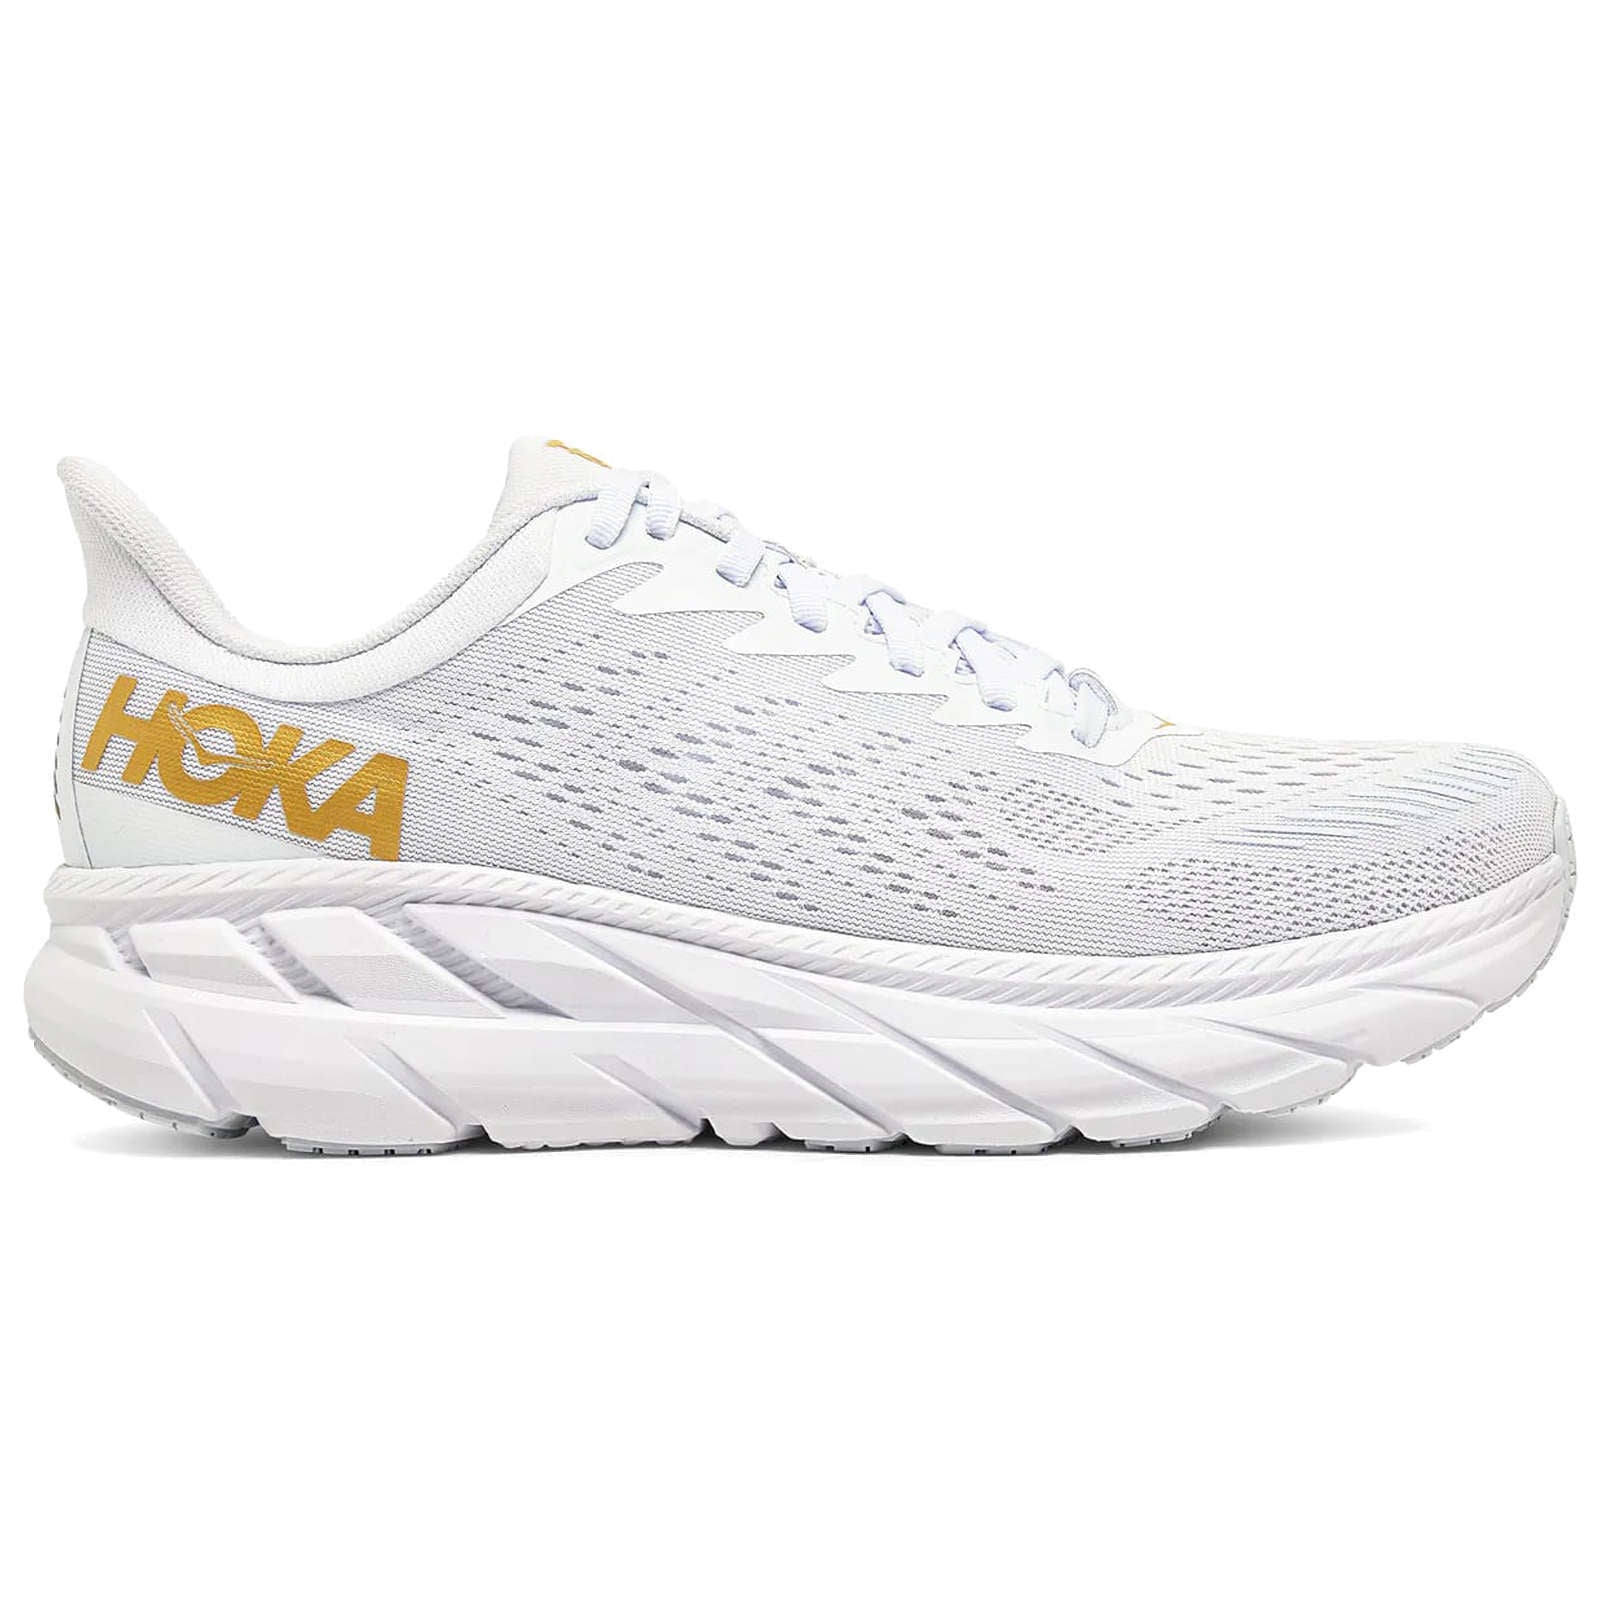 Hoka One One Clifton 7 Mesh Men's Low-Top Road Running Trainers#color_white golden egg